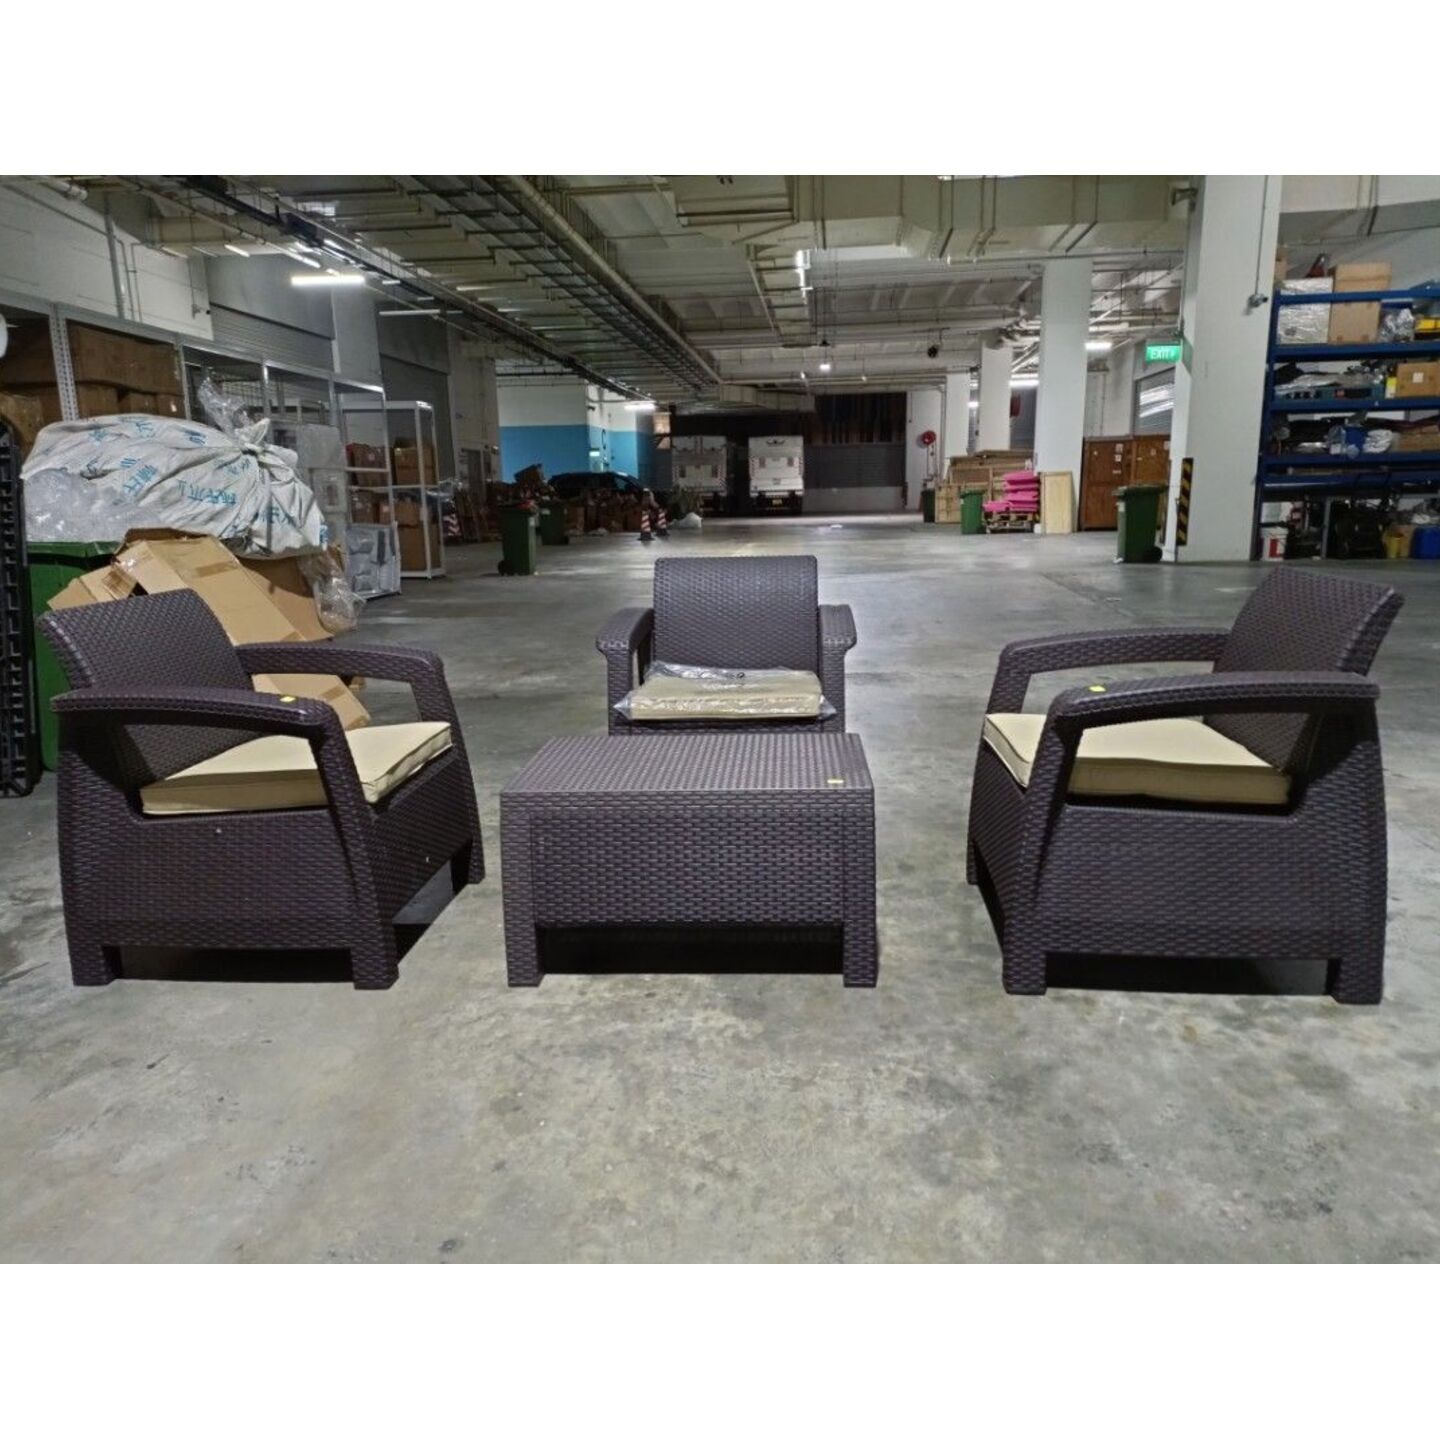 RODDY Outdoor Patio Set in COFFEE BROWN